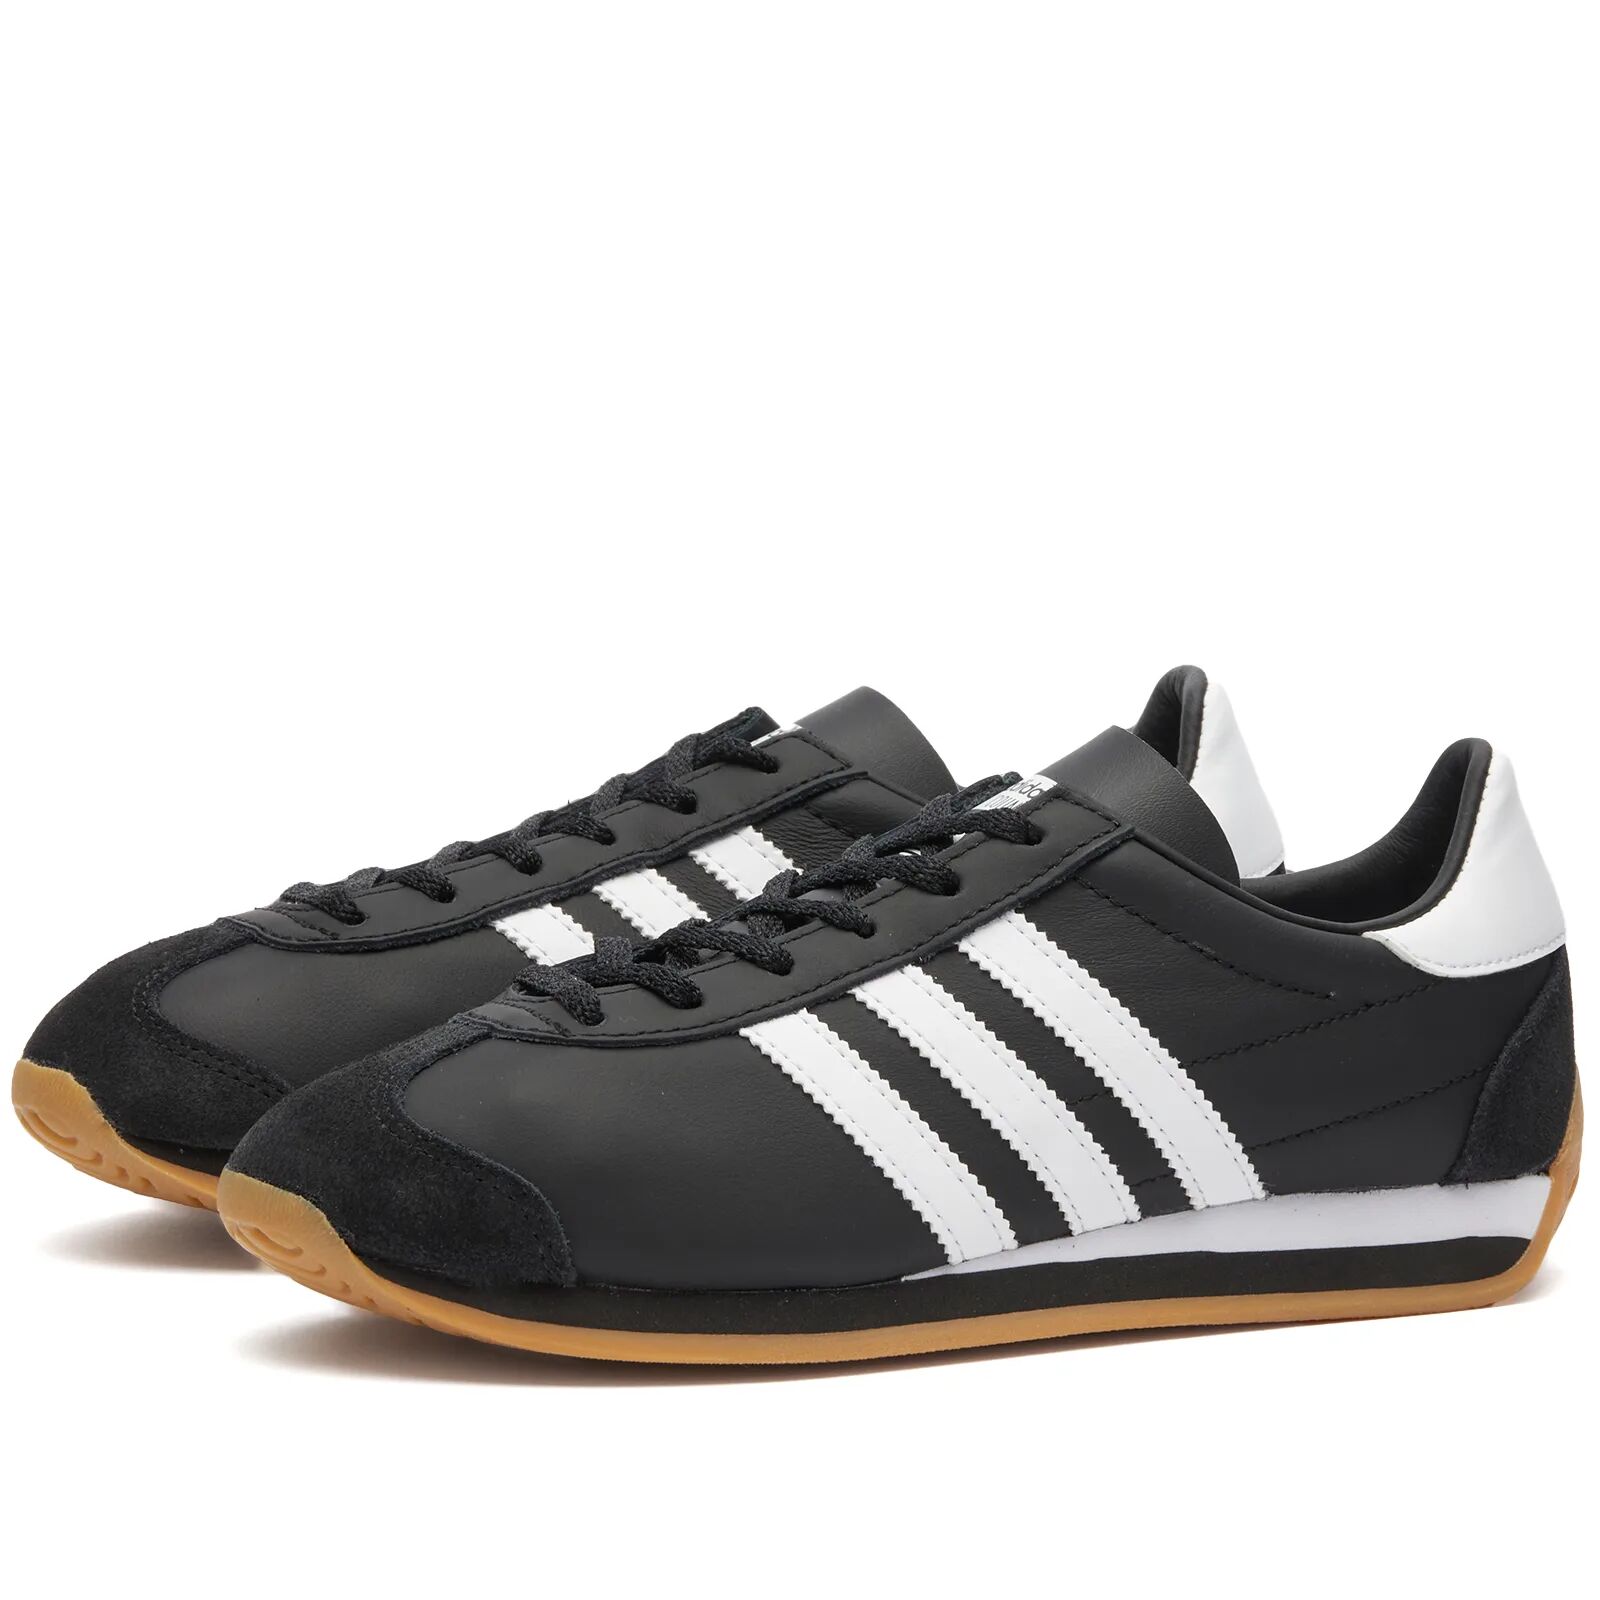 Adidas Men's Country OG Sneakers in Core Black/White, Size UK 7.5